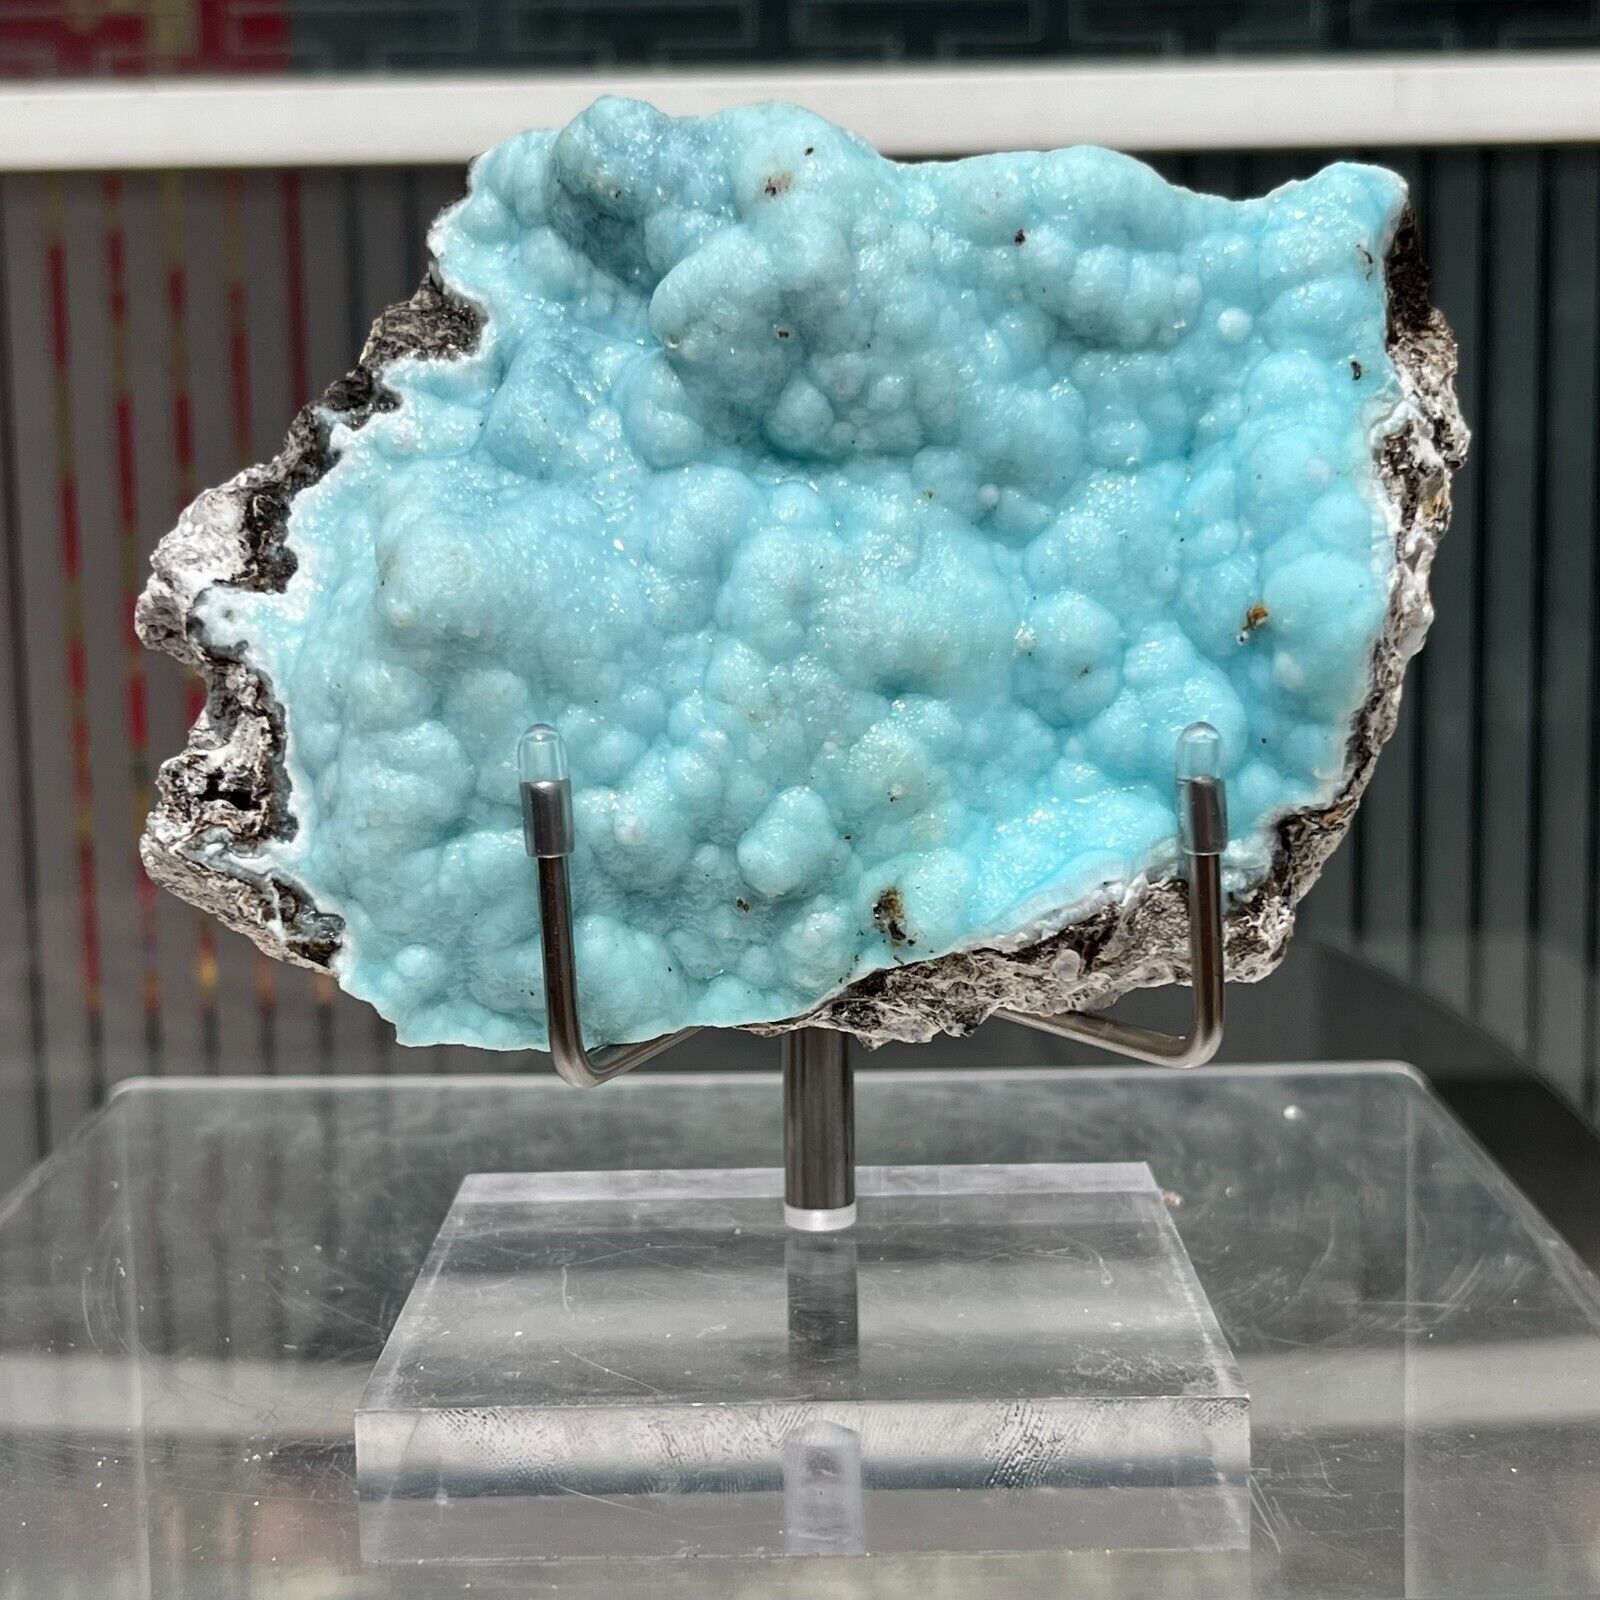 535g Gorgeous Natural hemimorphite rough raw crystal Mineral Specimen +Stand